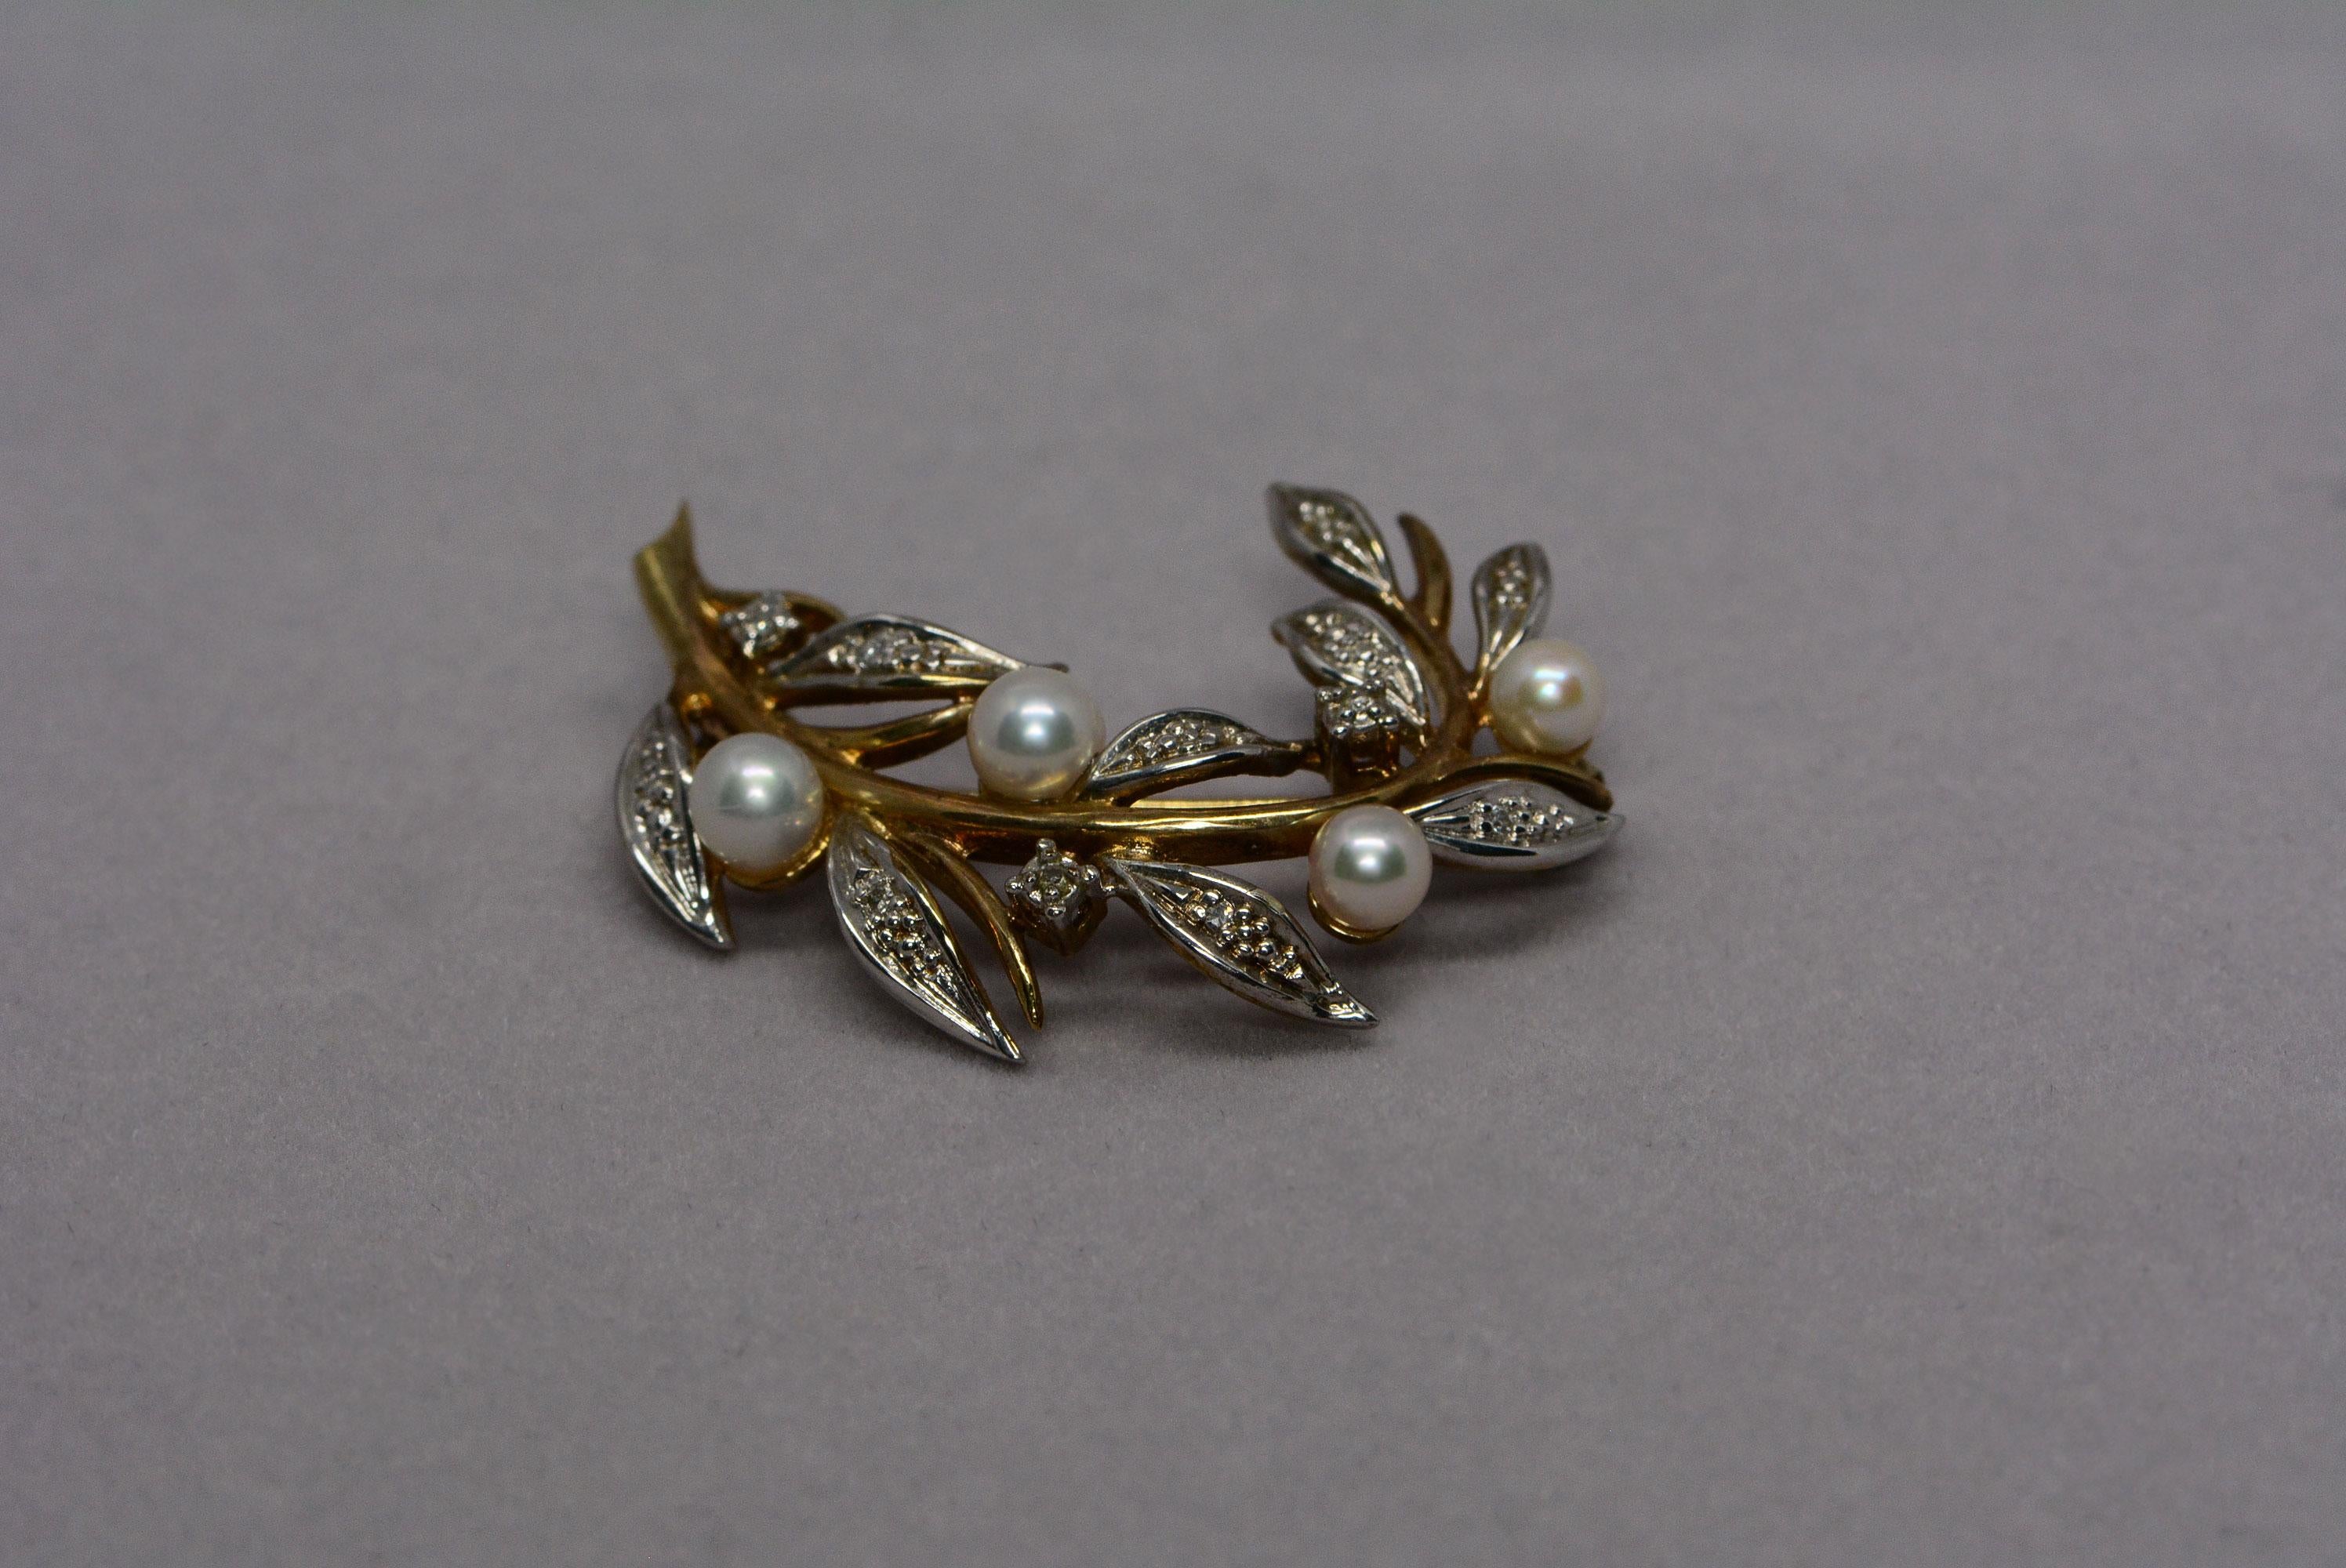 Modern Floral Cultured Pearl and Diamond 9 Karat Gold Brooch and Earrings